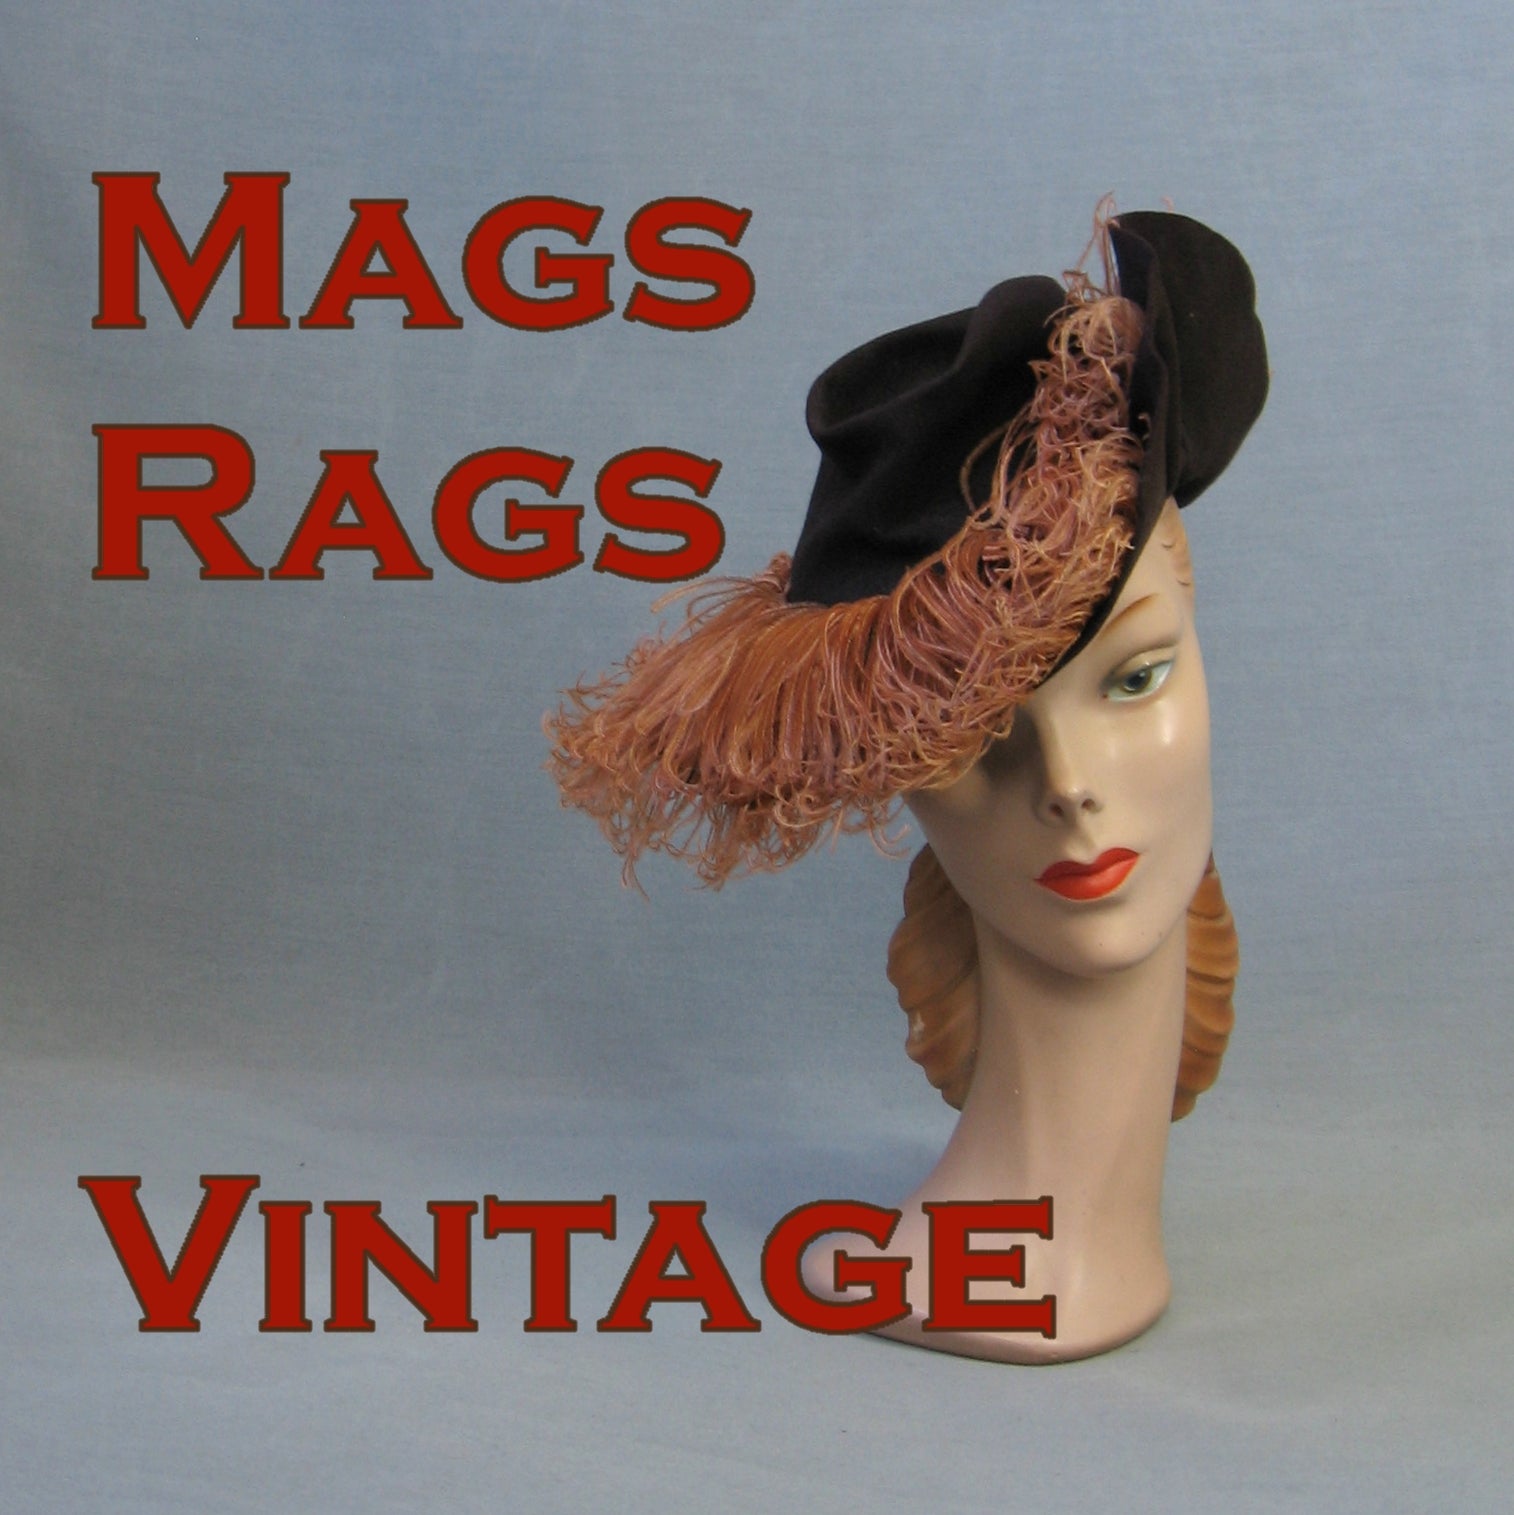 Welcome to the New Look of MagsRags Vintage!